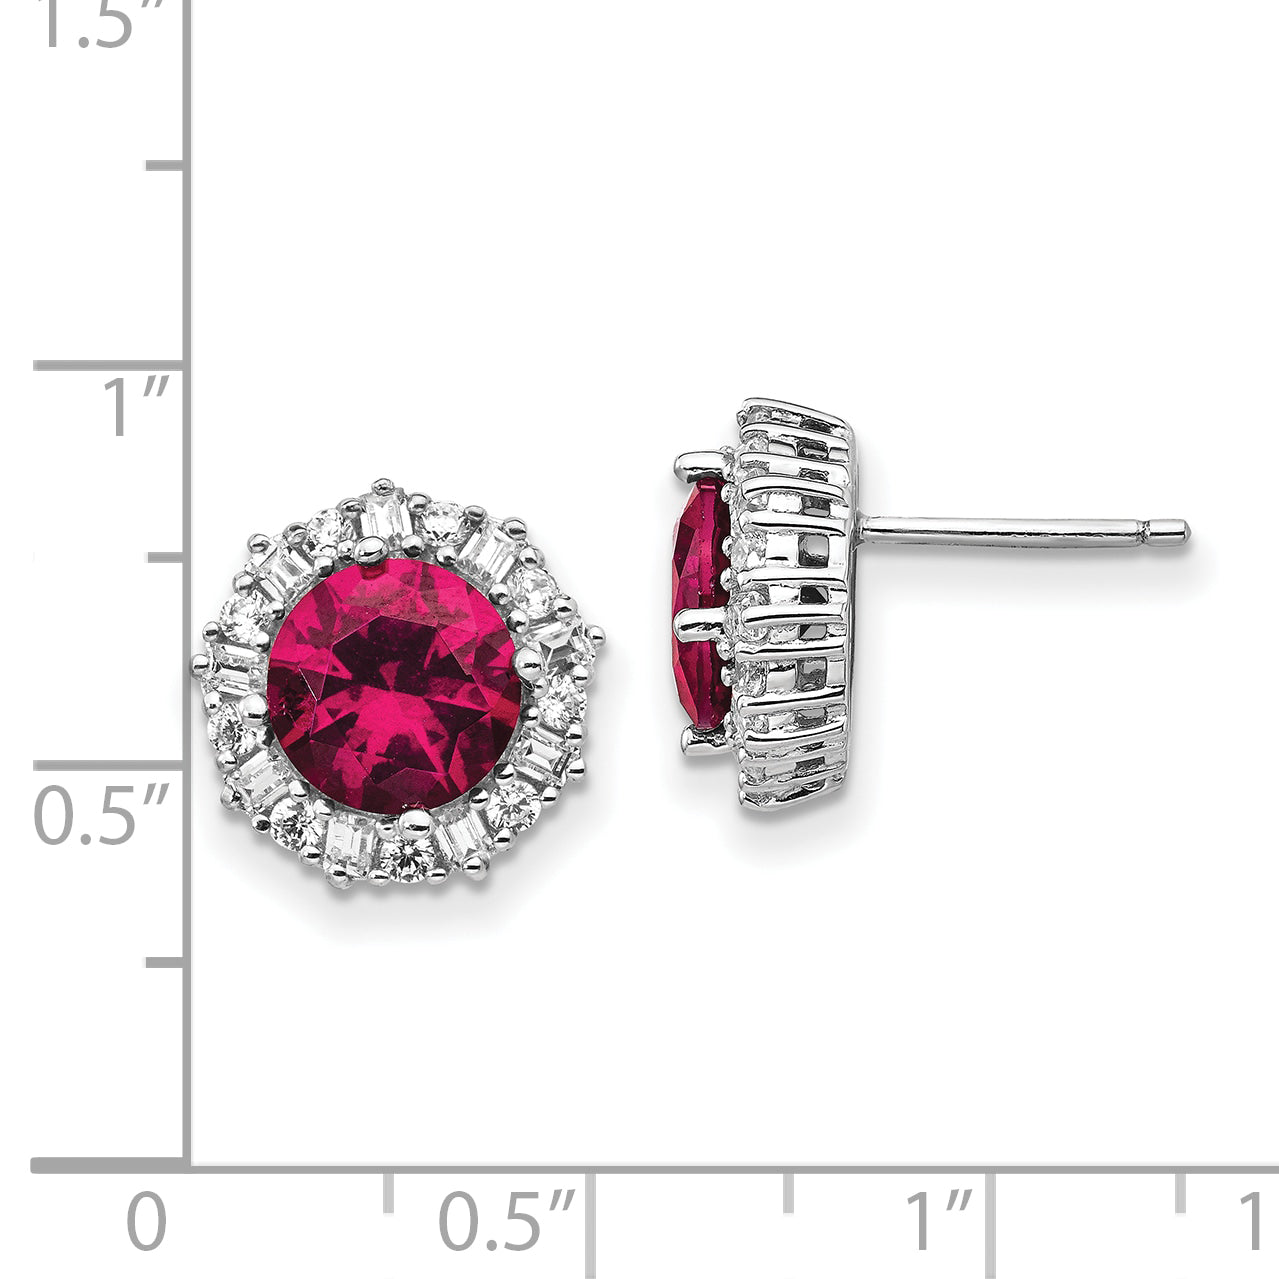 Cheryl M Sterling Silver Rhodium-plated Brilliant-cut Lab Created Ruby and Brilliant-cut/Baguette-cut White CZ Post Earrings